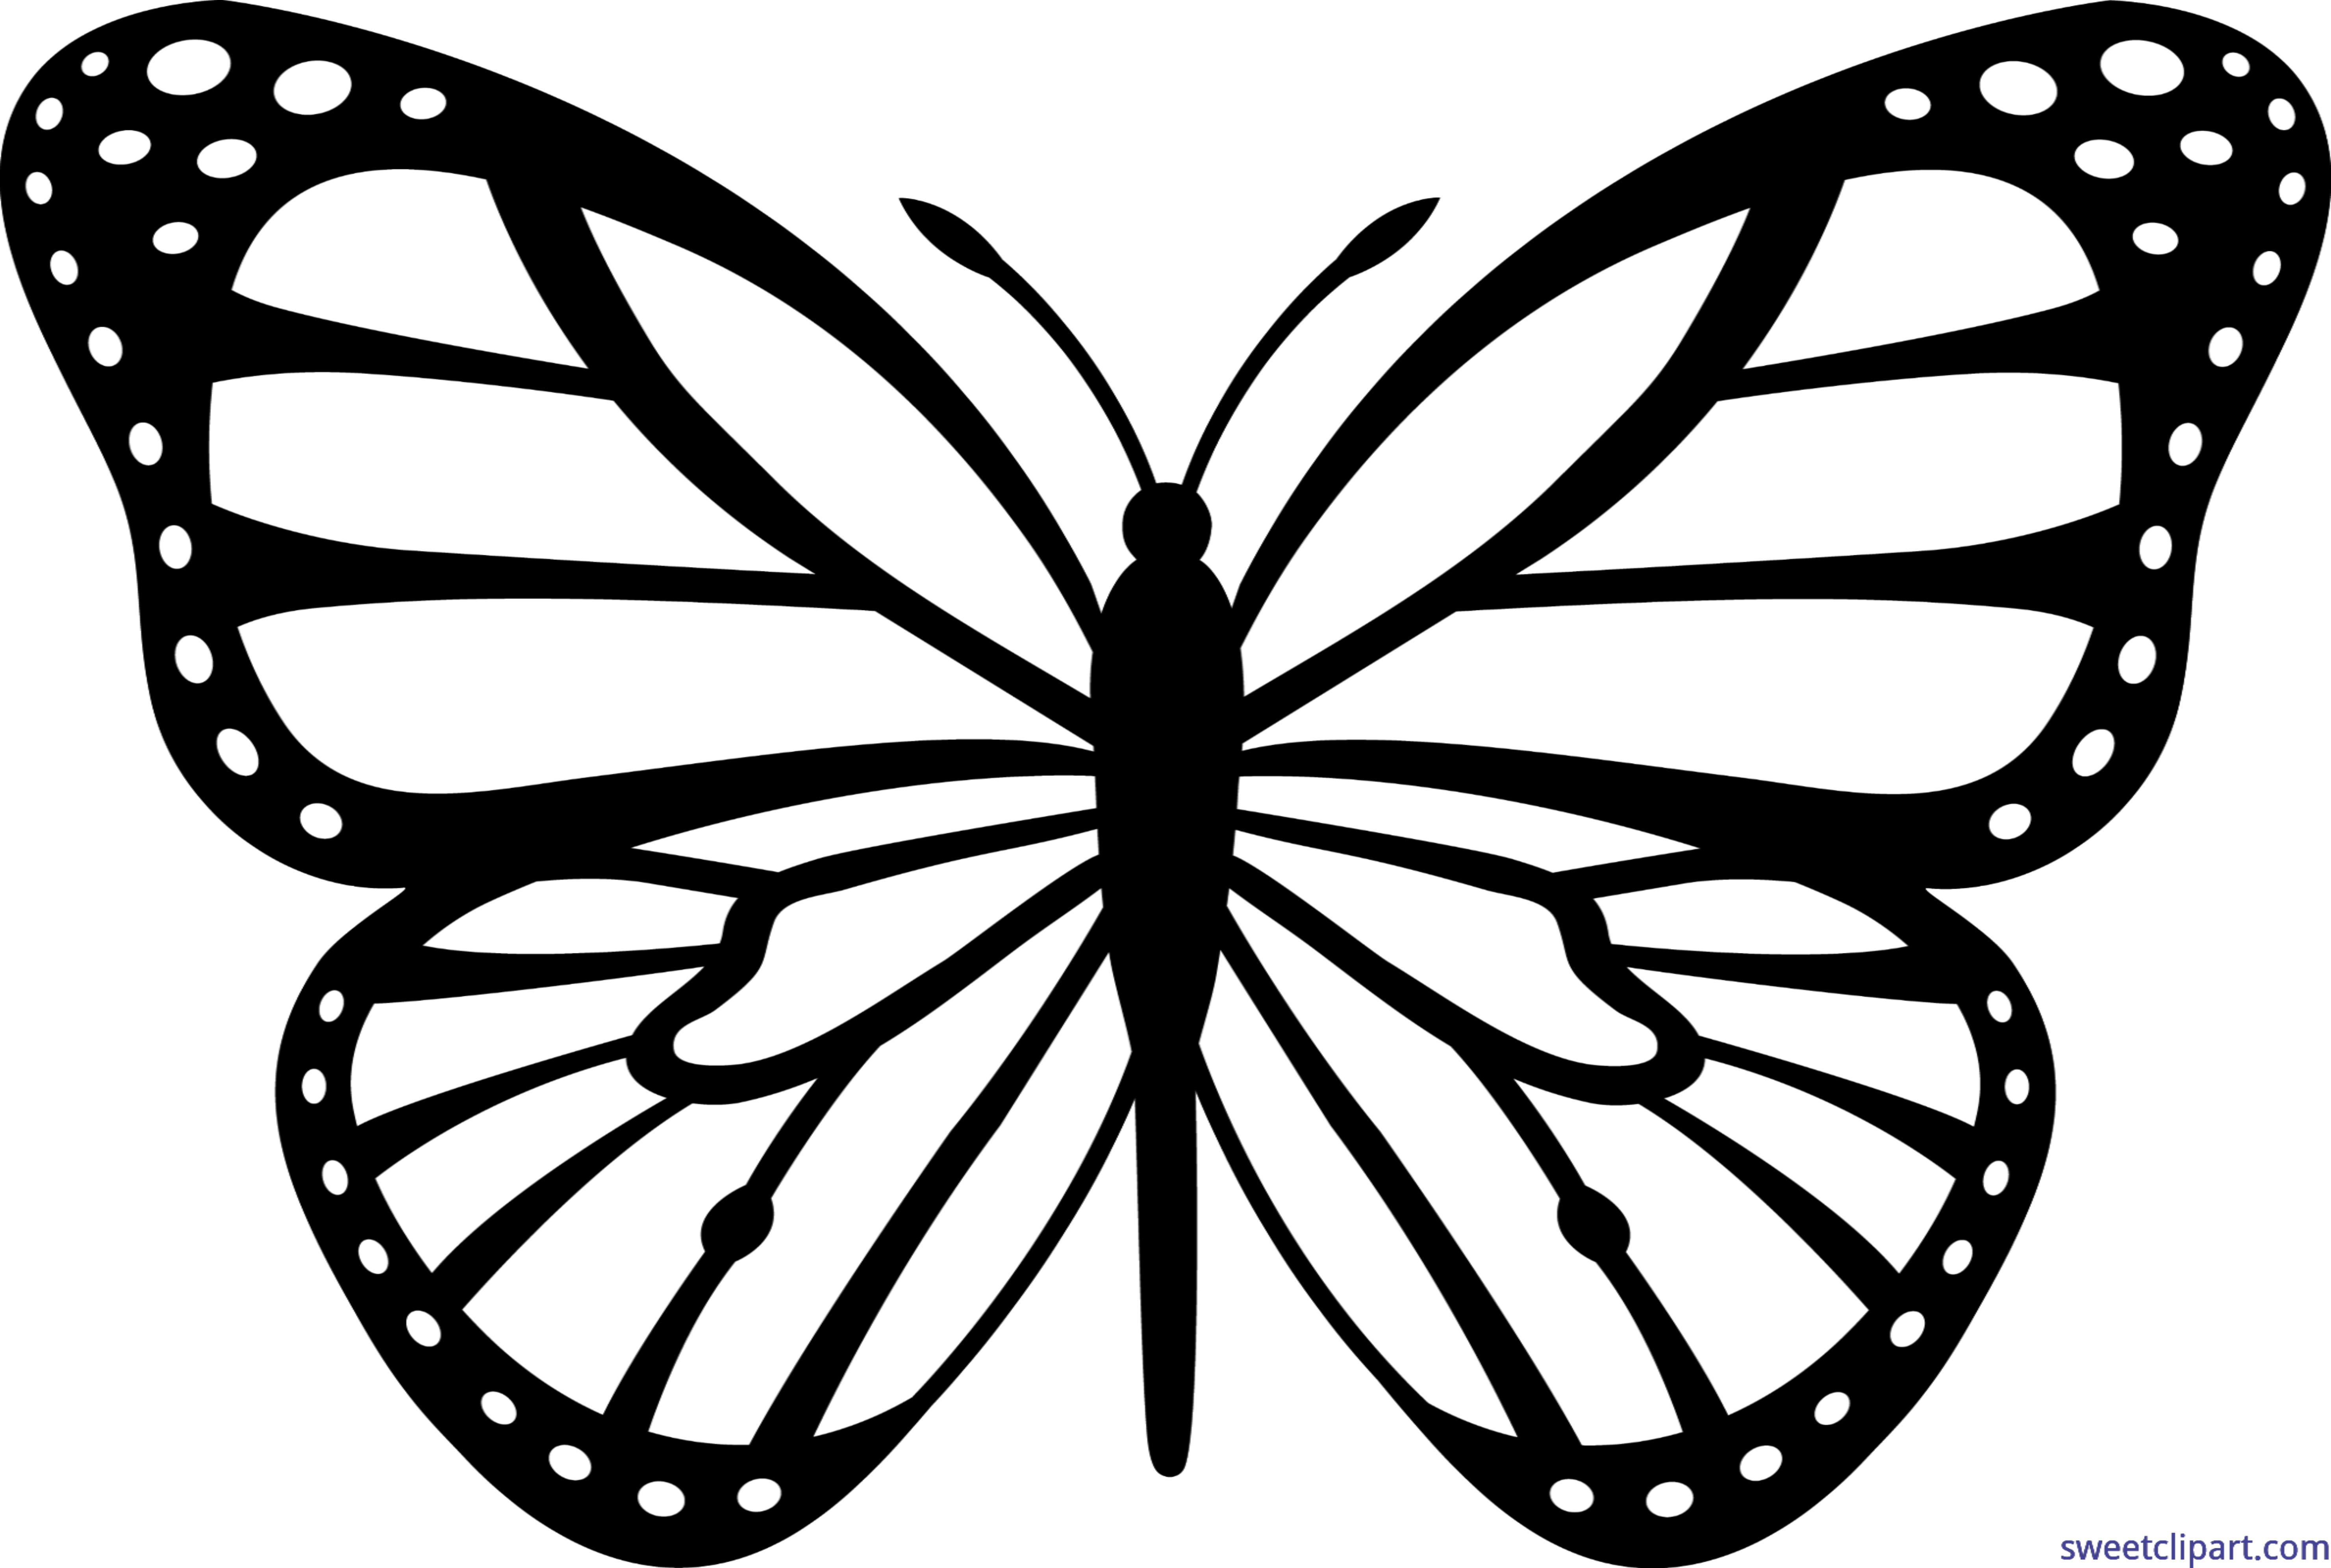 Butterfly Black and White Logo - Monarch Butterfly Black White Clip Art - Sweet Clip Art